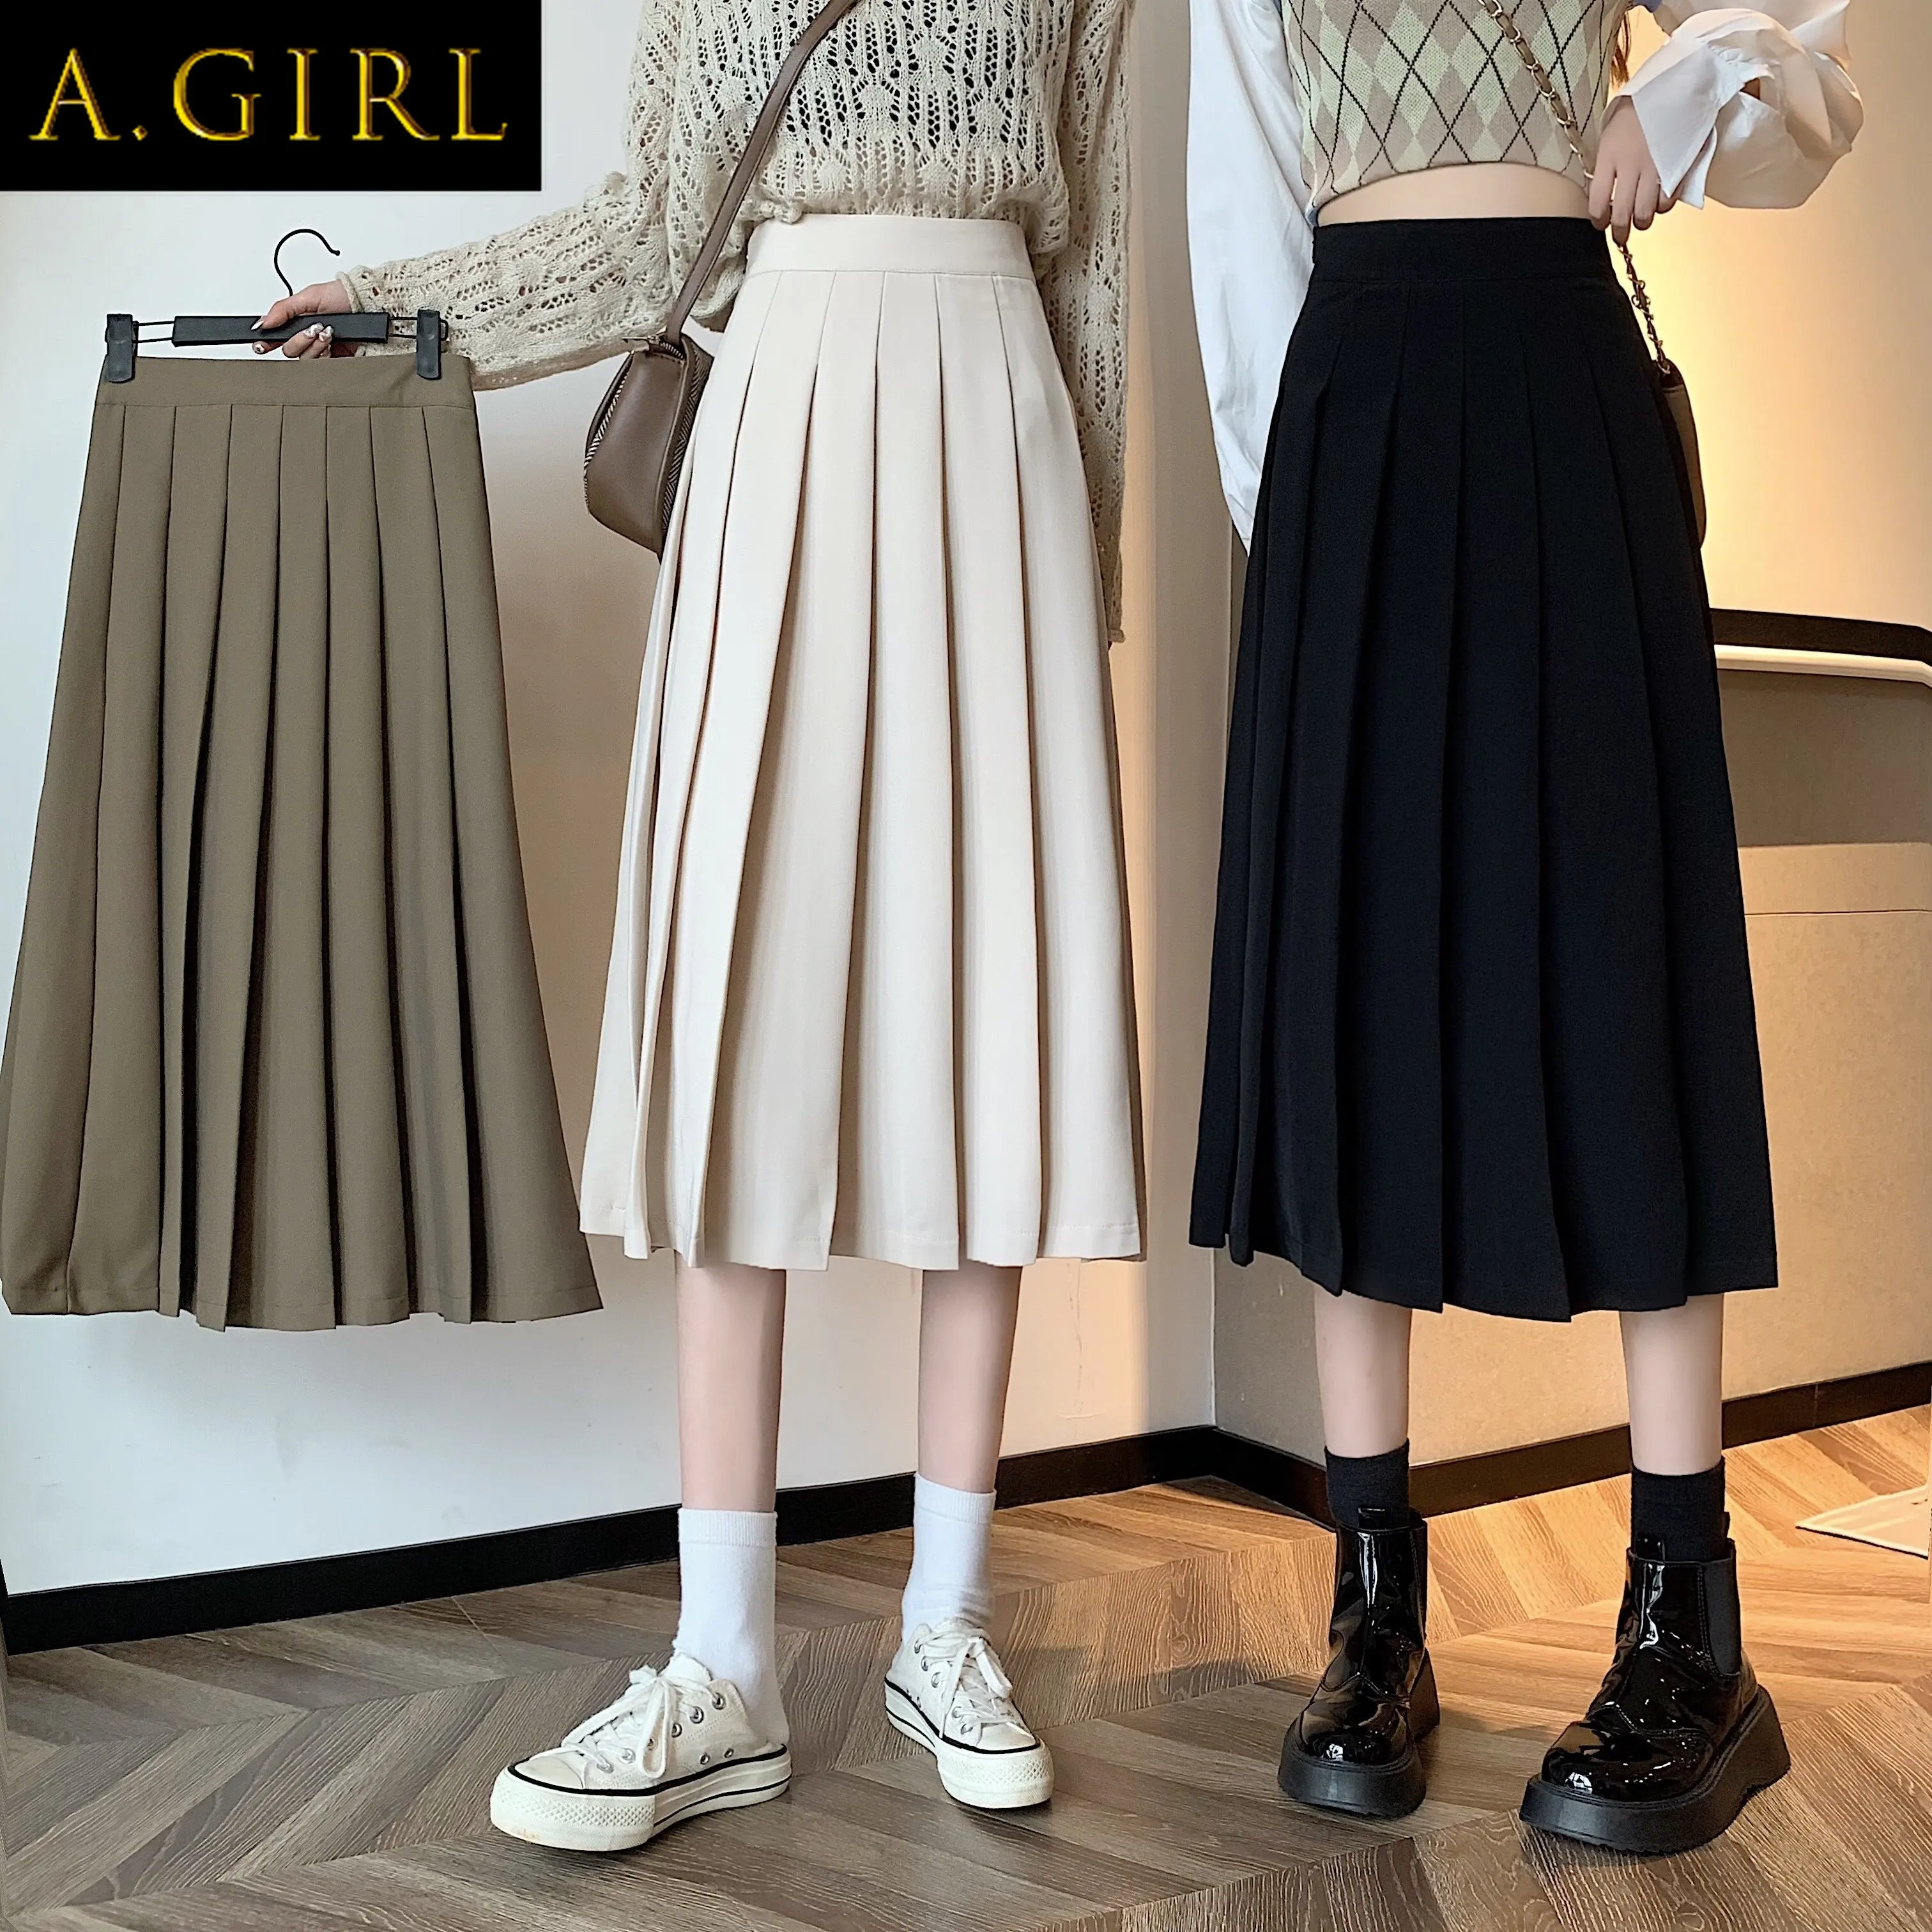 

A GIRLS Skirts Women Tender Mid-calf Ulzzang Pleated Leisure Pure Empire Elegant Vintage All-match Friends Winter Mujer Popular